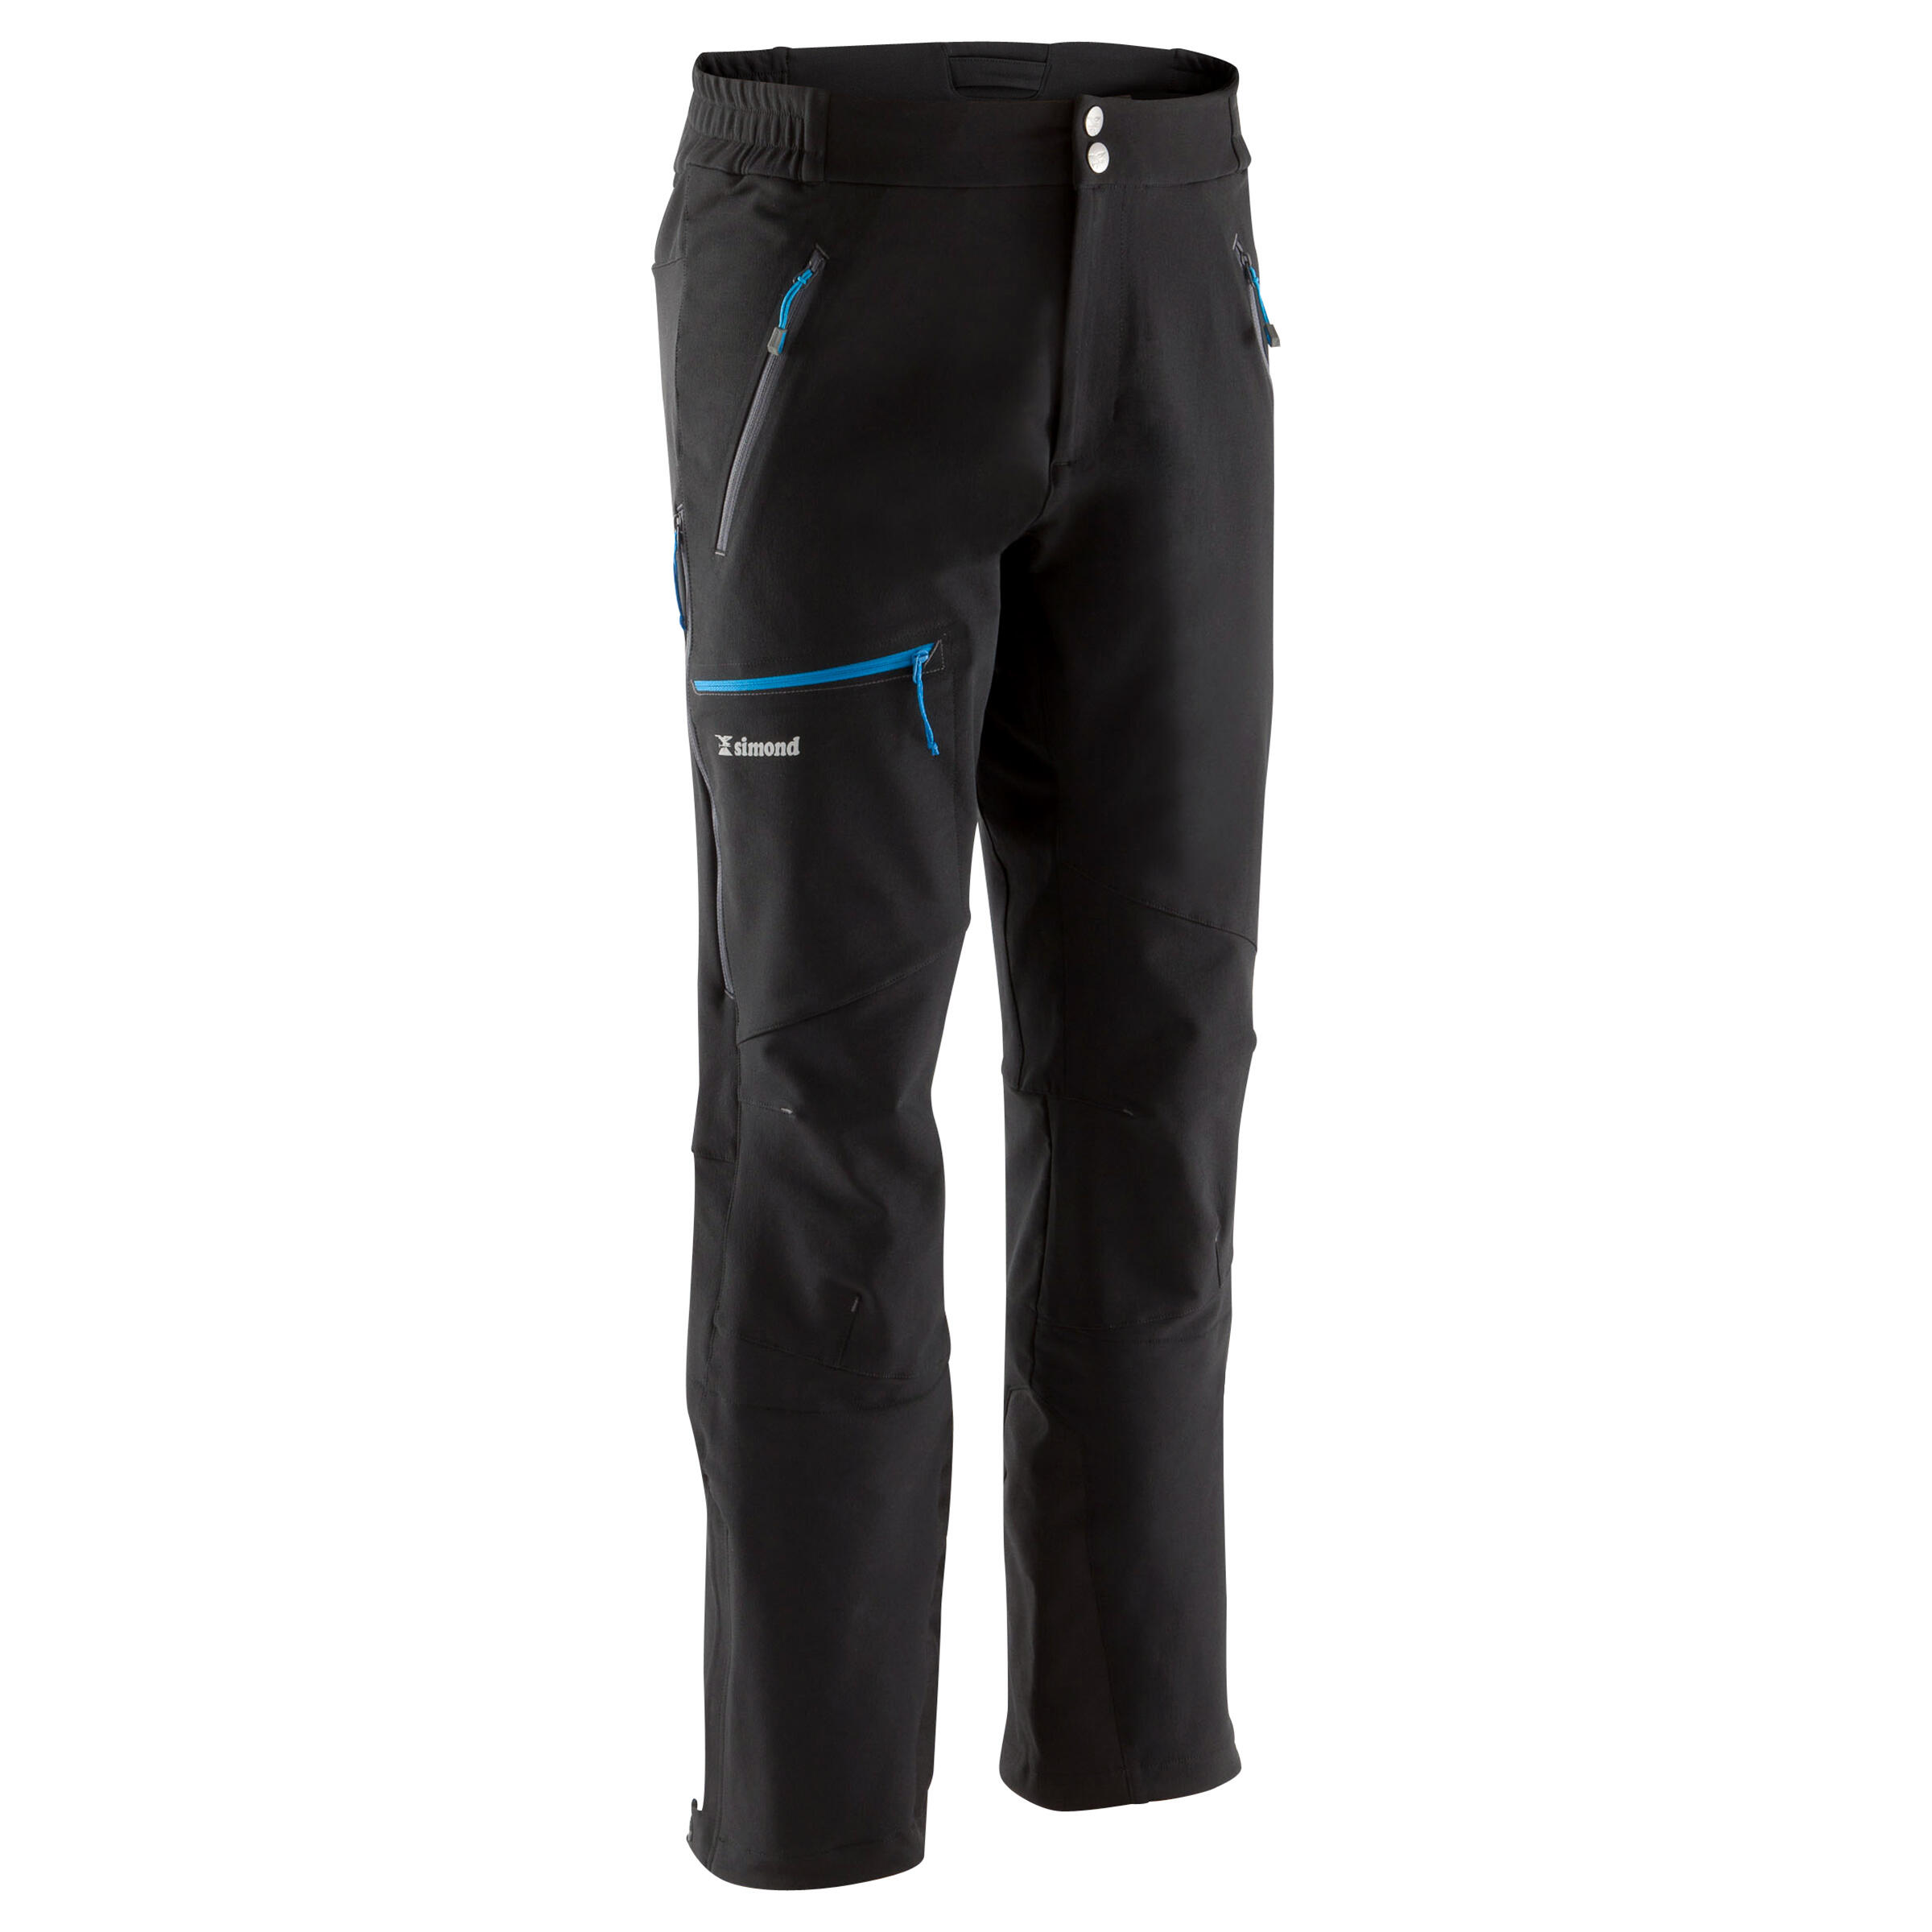 These over-trousers... - Decathlon Sports India - Belapur | Facebook